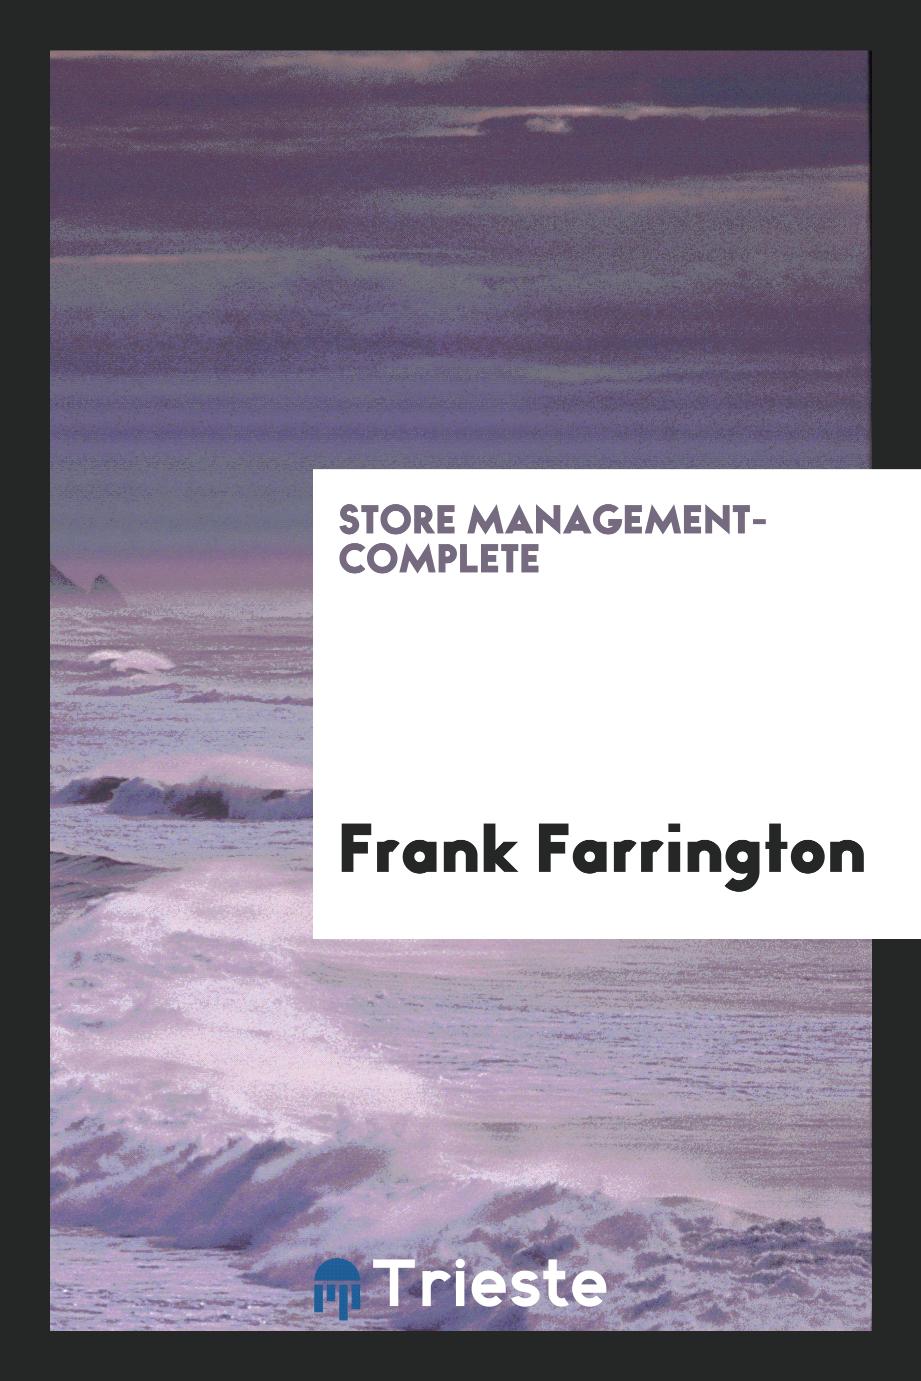 Store management-complete